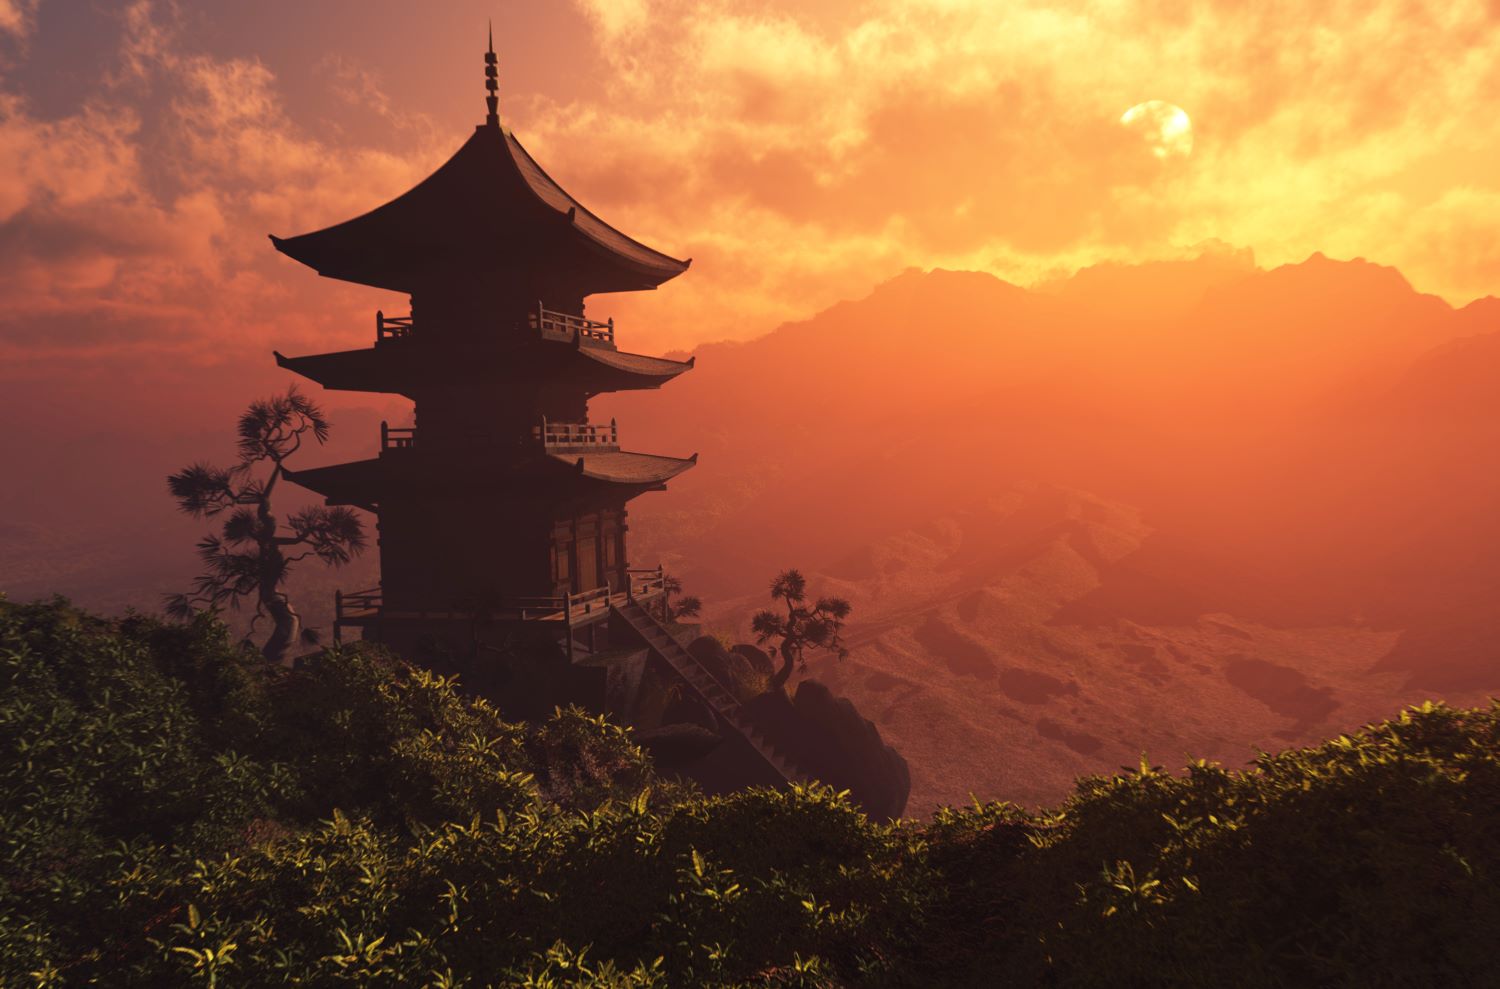 Chinese pagoda in the mountains